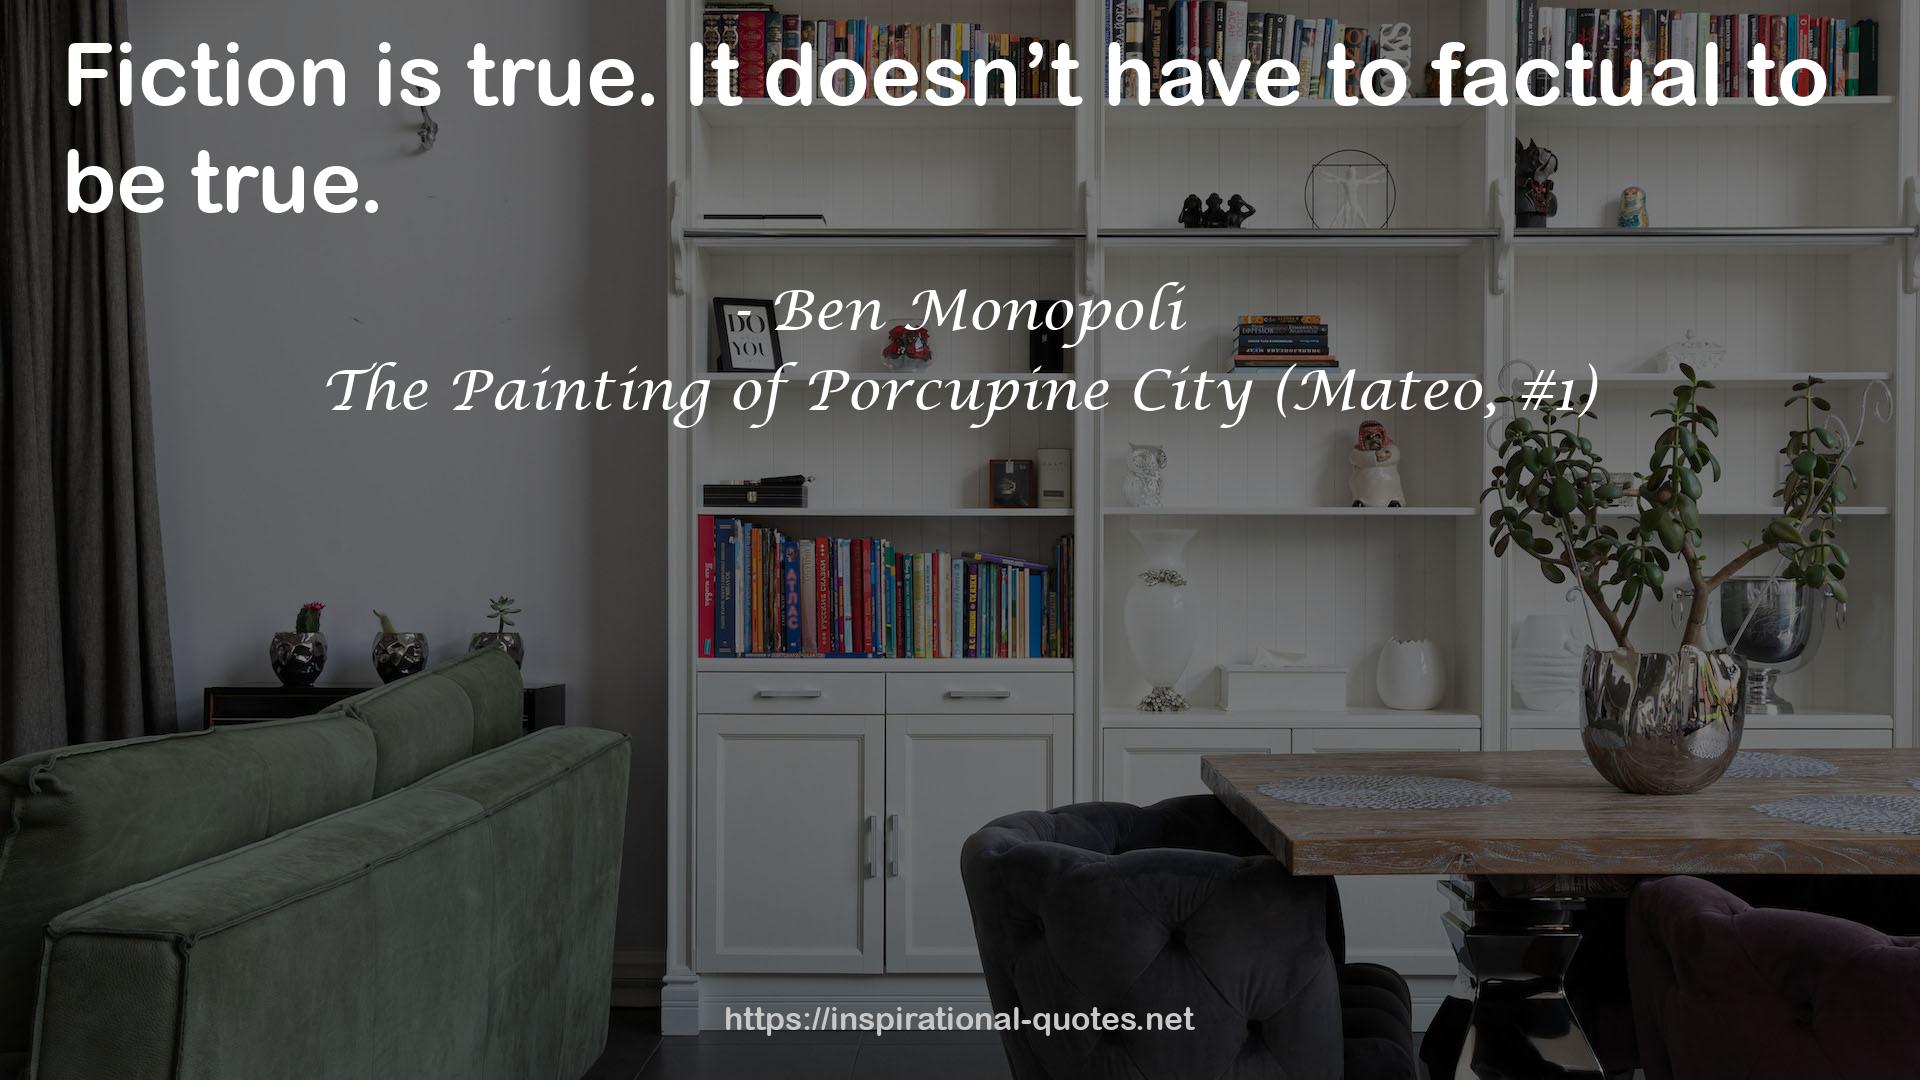 The Painting of Porcupine City (Mateo, #1) QUOTES